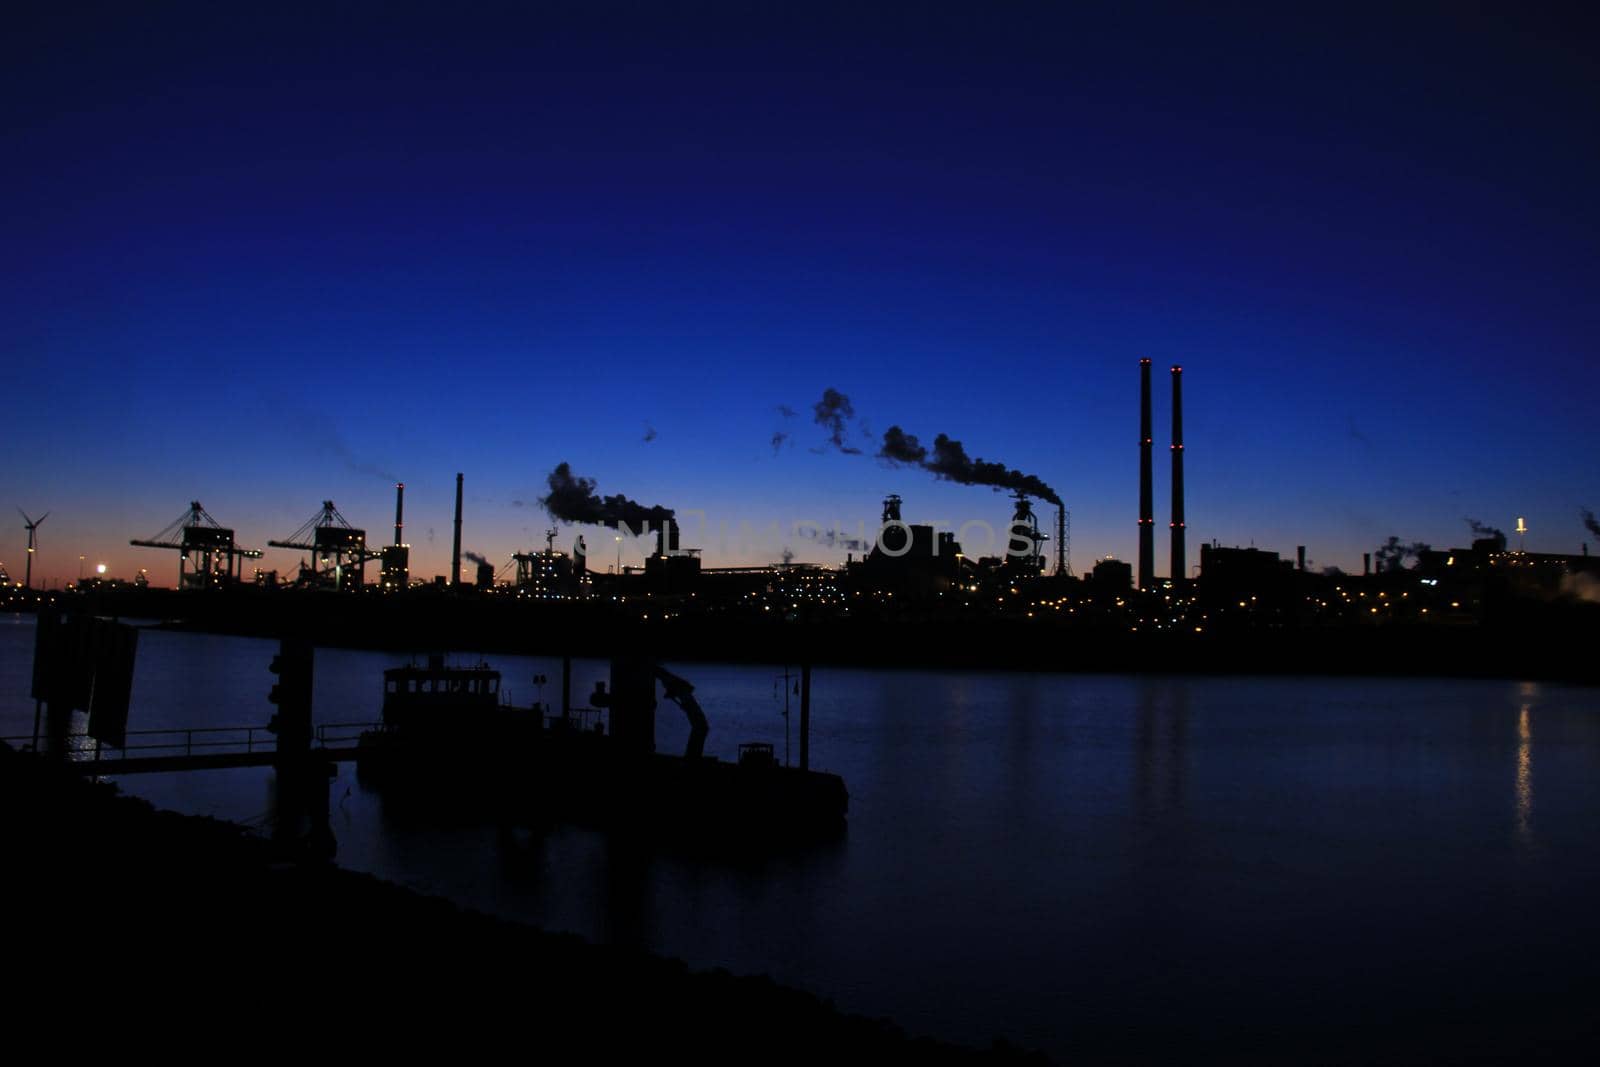 Skyline of an industrial area during sunset by studioportosabbia